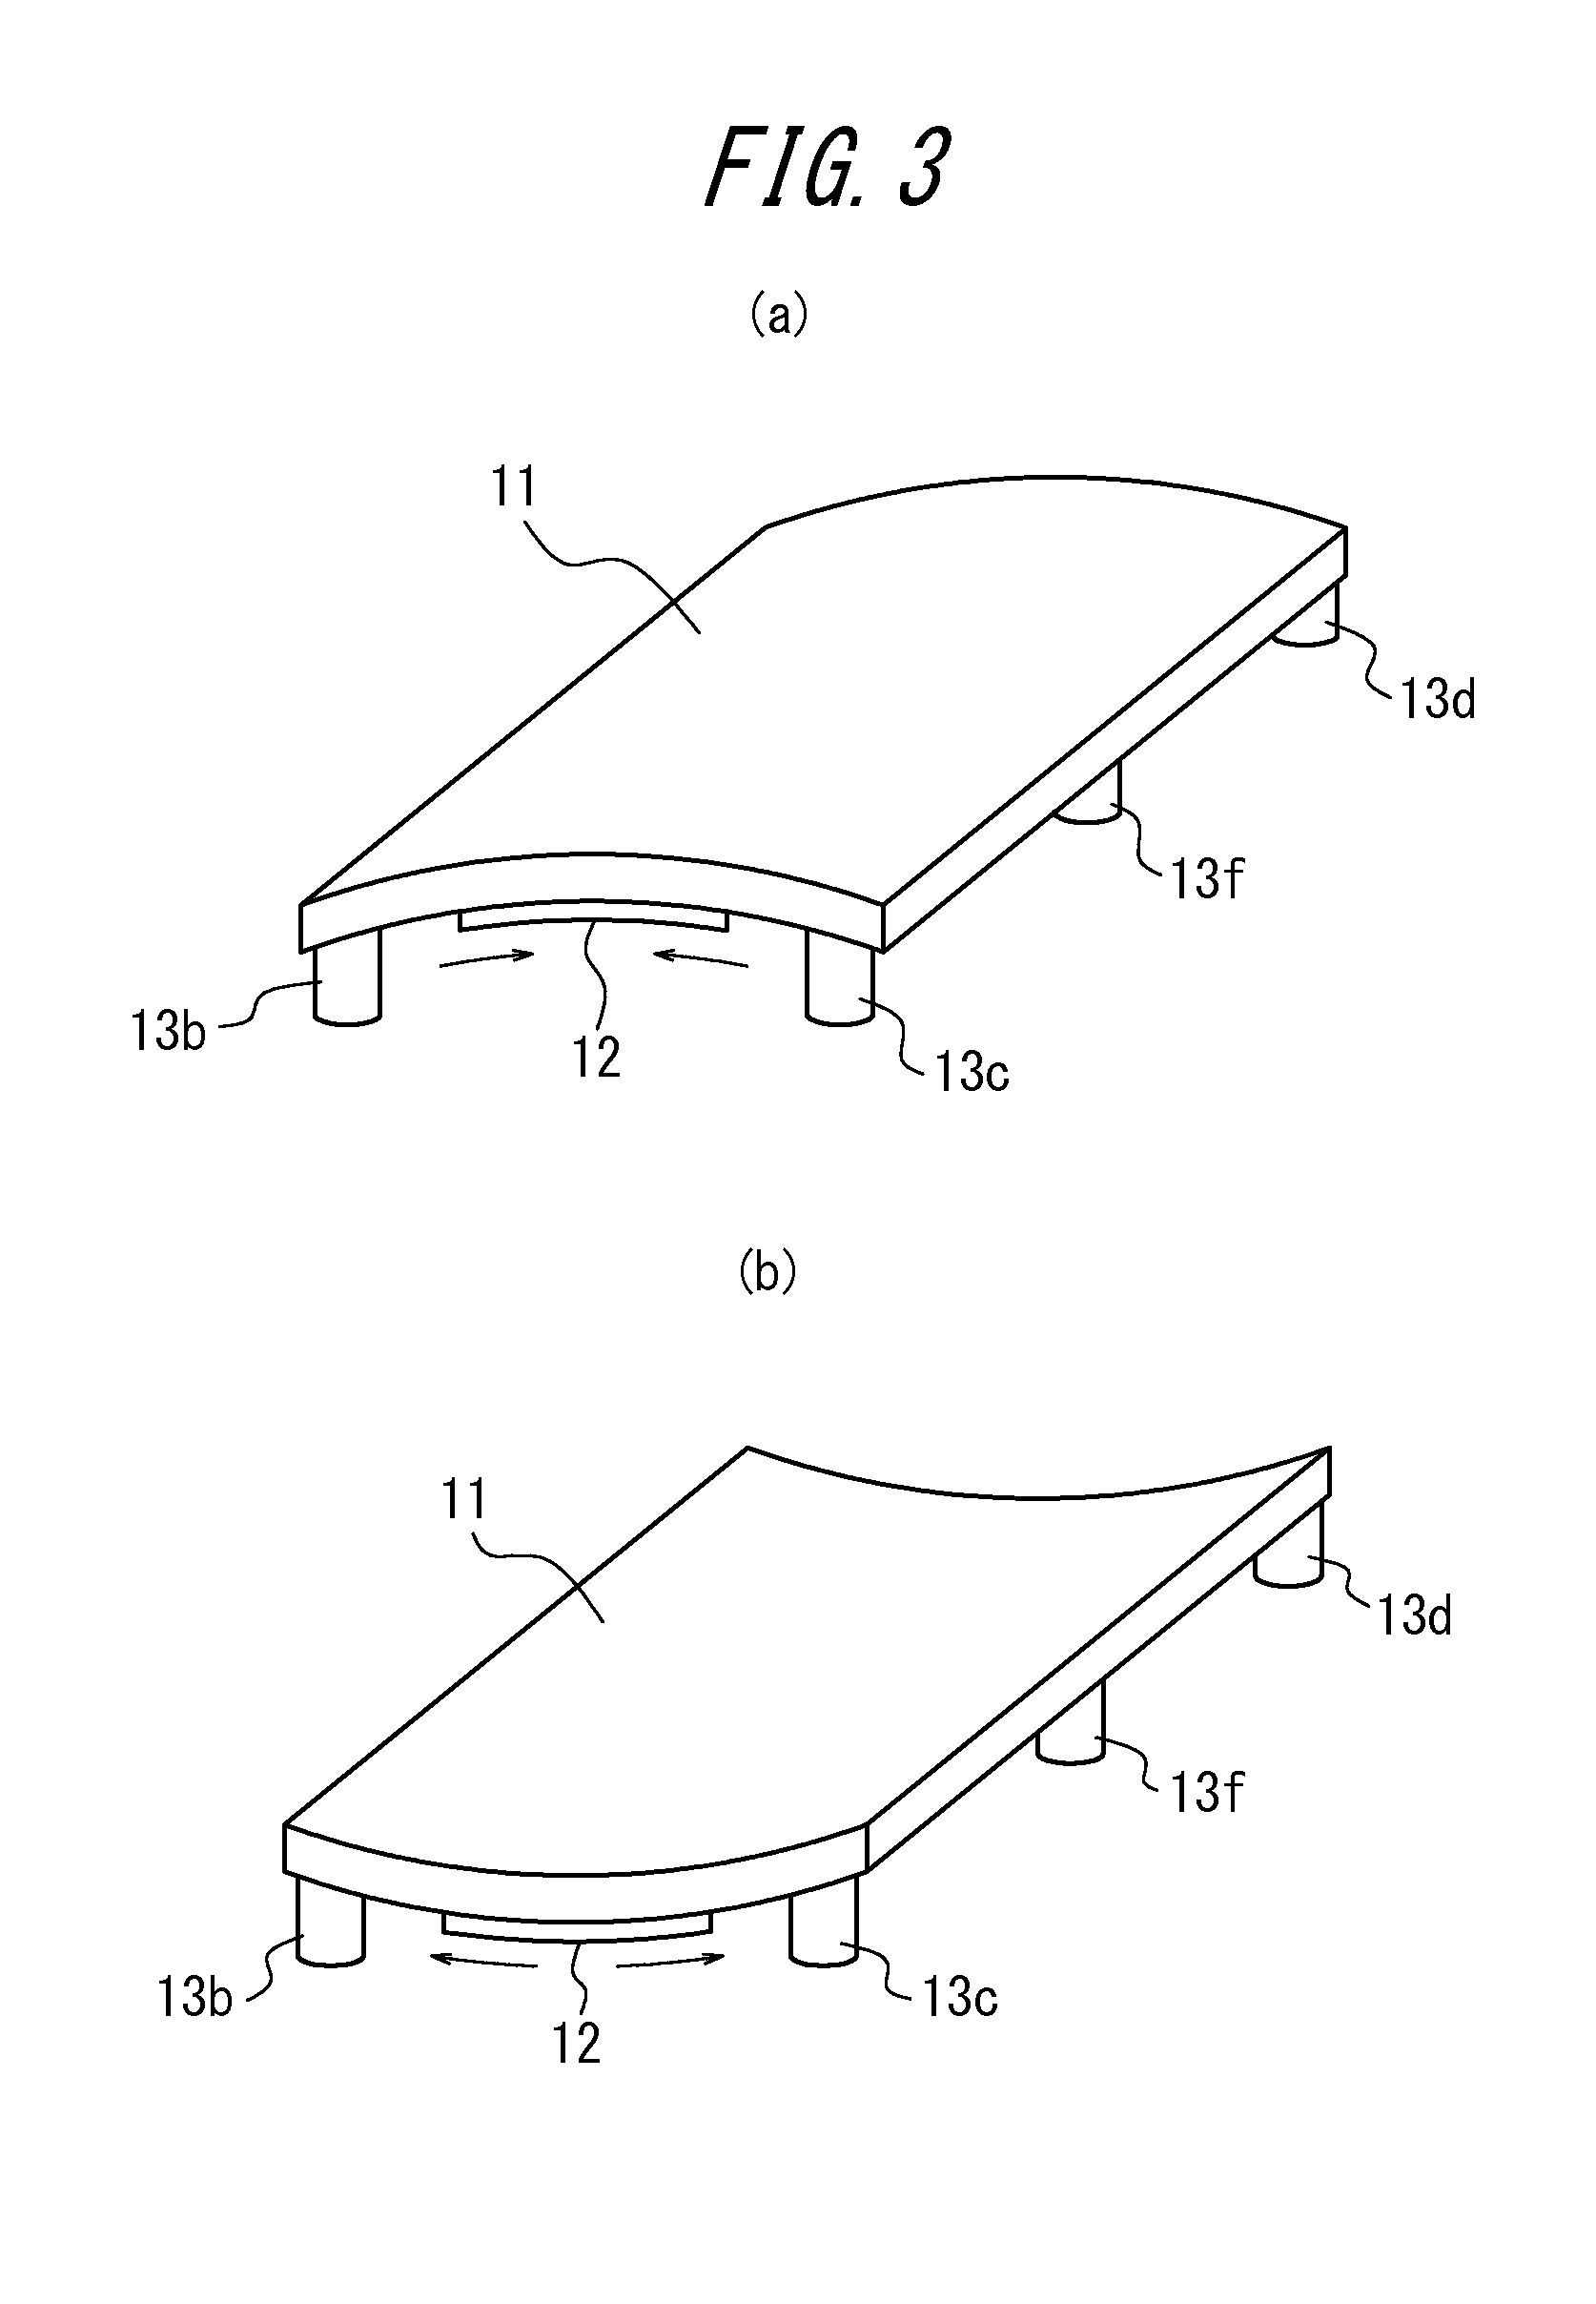 Touch panel apparatus